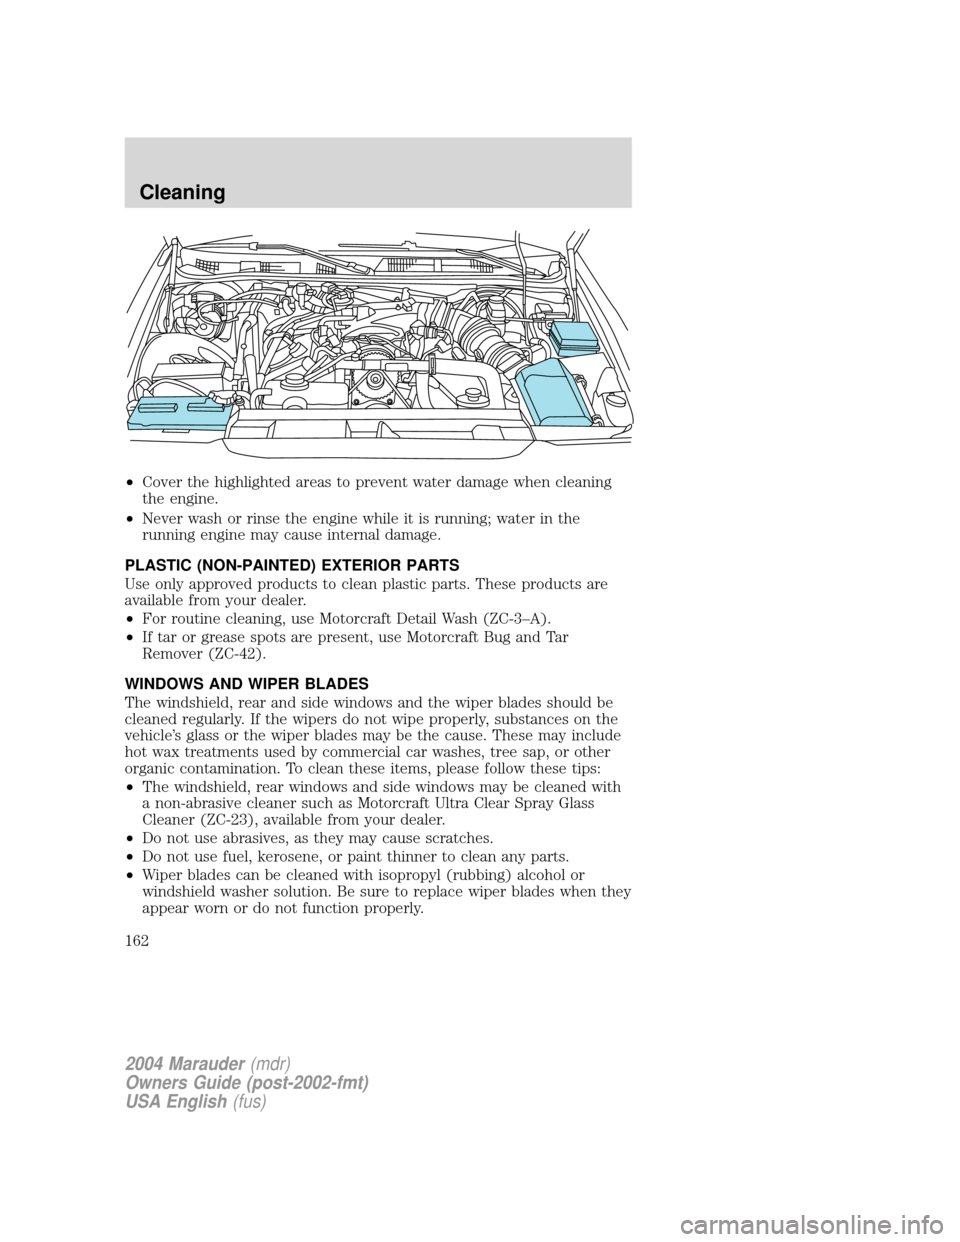 Mercury Marauder 2004  Owners Manuals ²Cover the highlighted areas to prevent water damage when cleaning
the engine.
²Never wash or rinse the engine while it is running; water in the
running engine may cause internal damage.
PLASTIC (NO